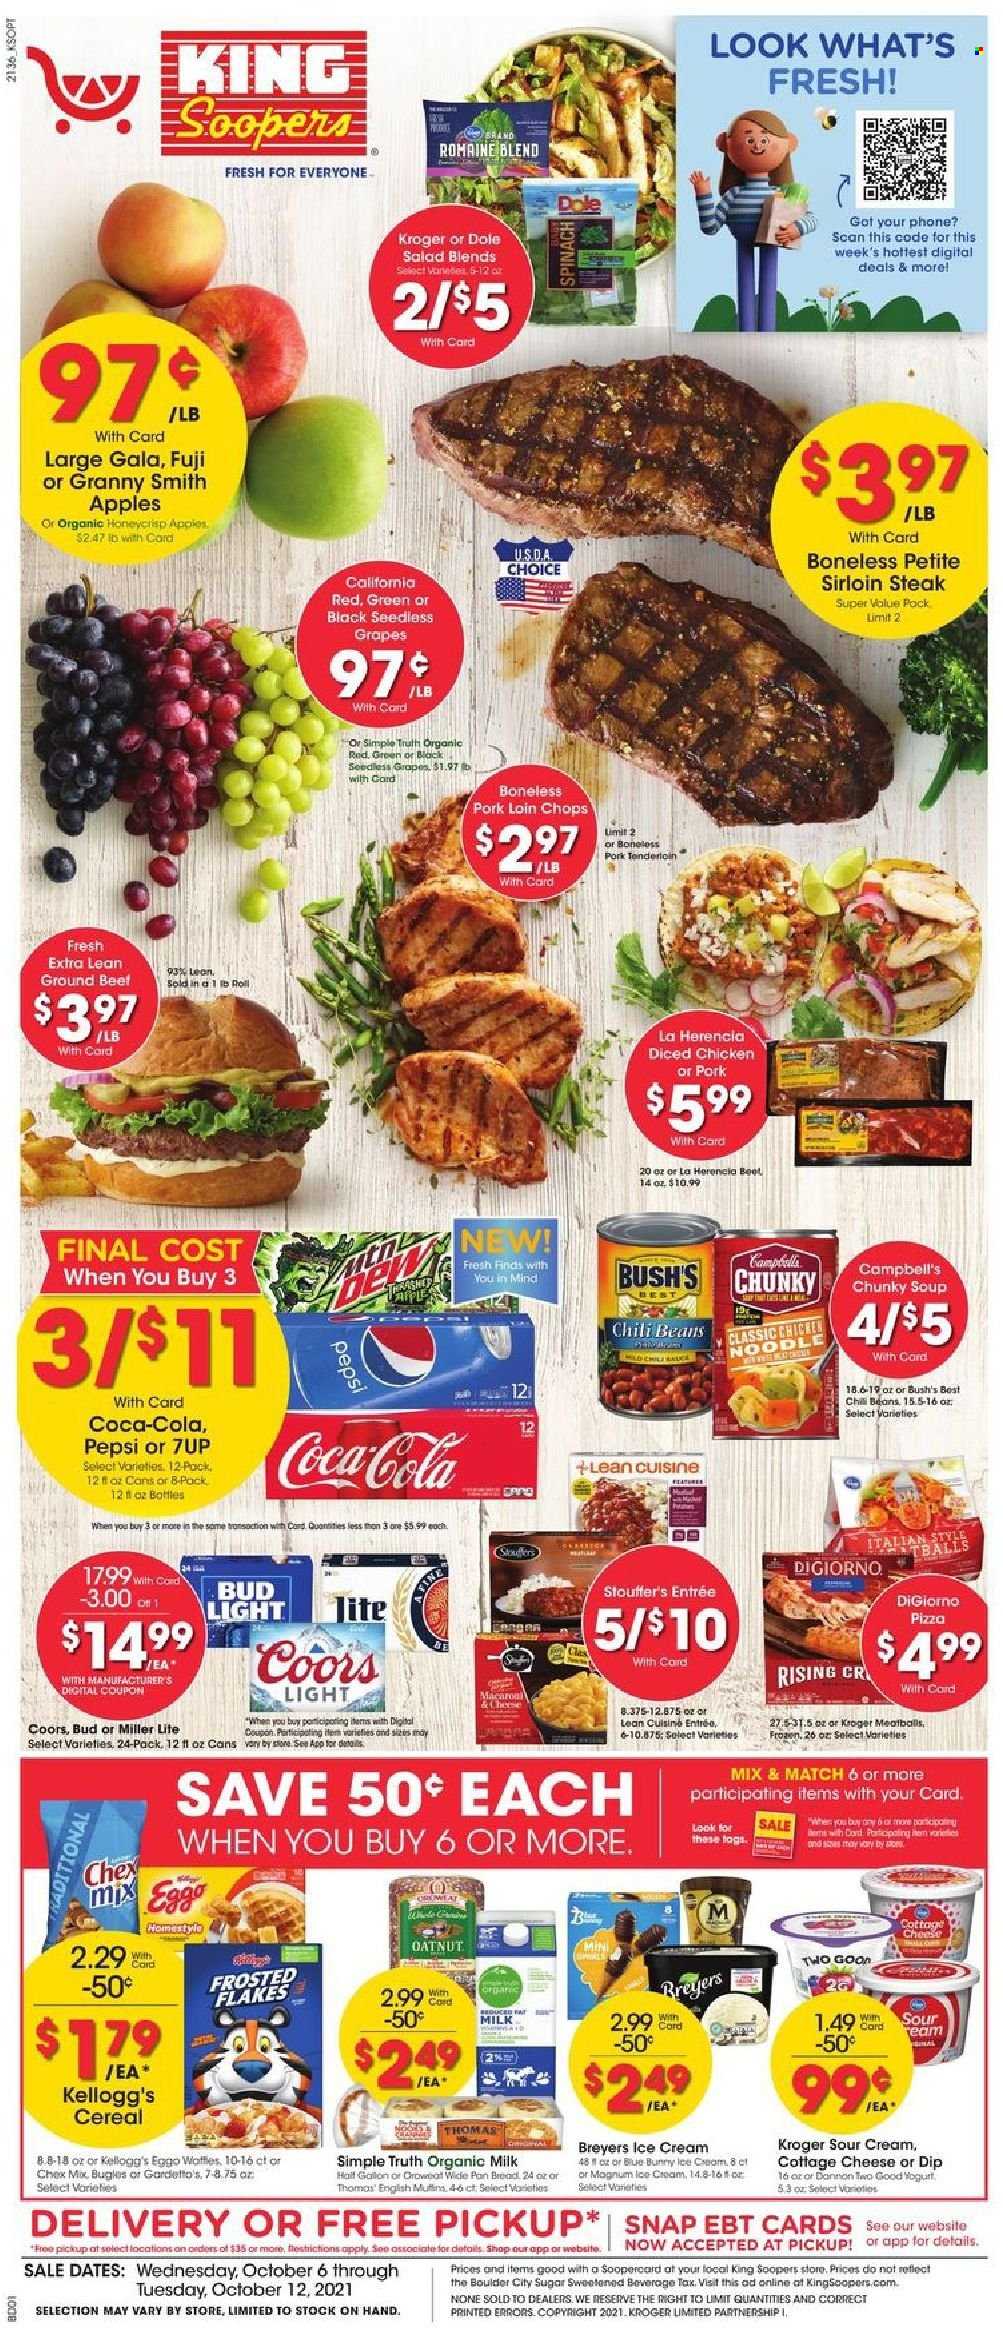 thumbnail - King Soopers Flyer - 10/06/2021 - 10/12/2021 - Sales products - seedless grapes, beans, salad, Dole, apples, Gala, grapes, Granny Smith, Campbell's, pizza, meatballs, soup, noodles, Lean Cuisine, cottage cheese, yoghurt, Dannon, organic milk, sour cream, dip, Magnum, Stouffer's, Kellogg's, sugar, chili beans, cereals, Frosted Flakes, Coca-Cola, Pepsi, 7UP, beer, Bud Light, beef sirloin, steak, sirloin steak, pork chops, pork loin, pork meat, pork tenderloin, Miller Lite, Coors. Page 1.